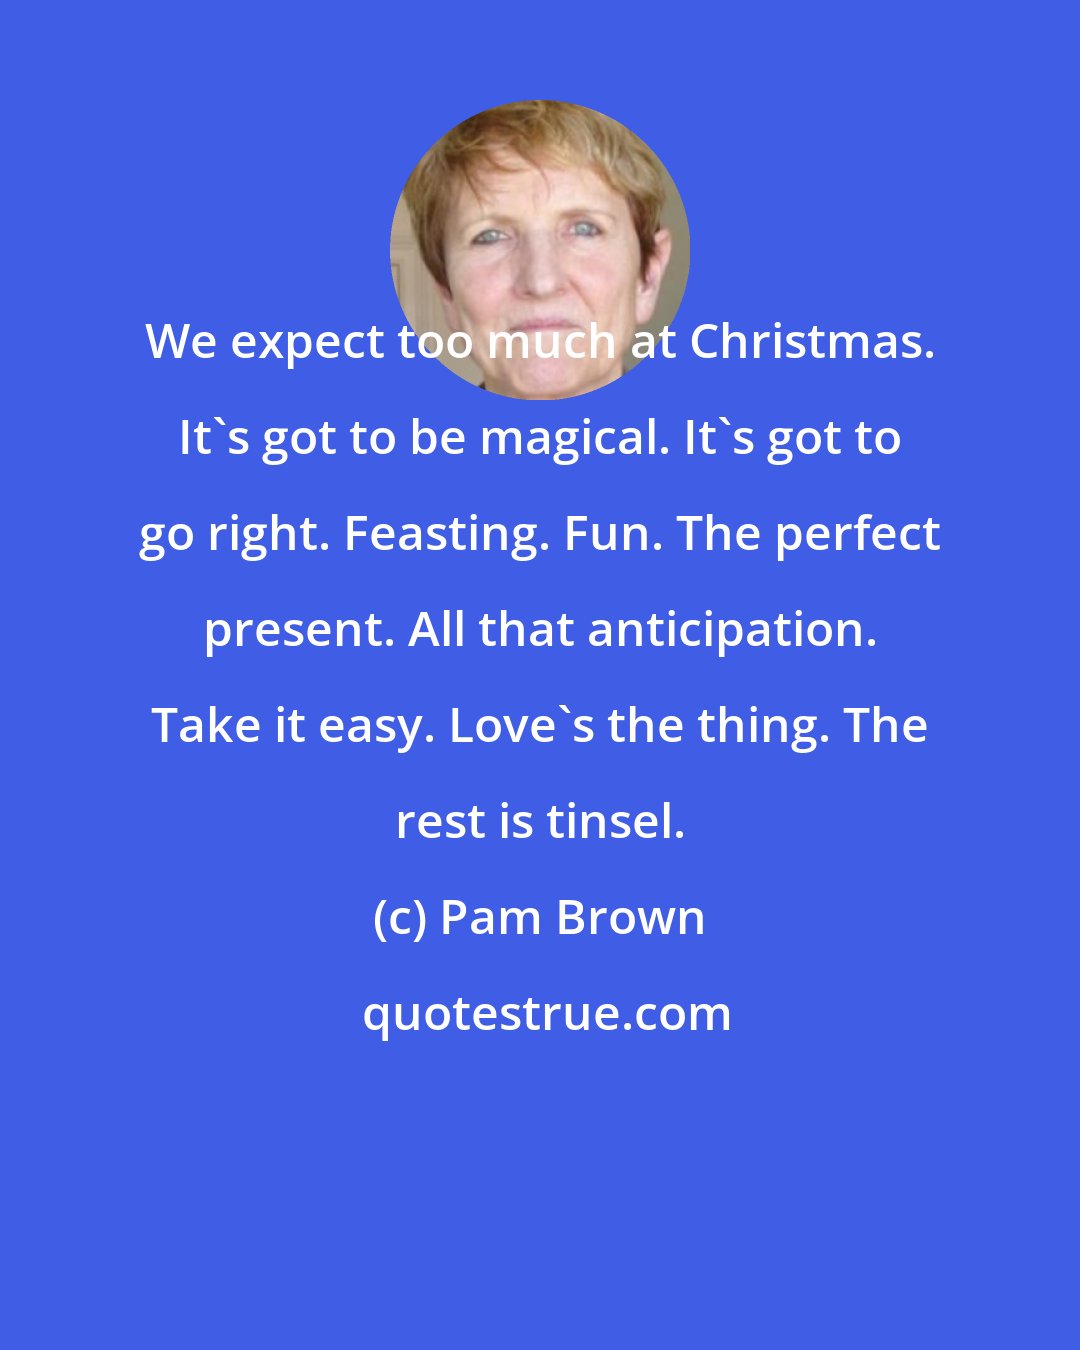 Pam Brown: We expect too much at Christmas. It's got to be magical. It's got to go right. Feasting. Fun. The perfect present. All that anticipation. Take it easy. Love's the thing. The rest is tinsel.